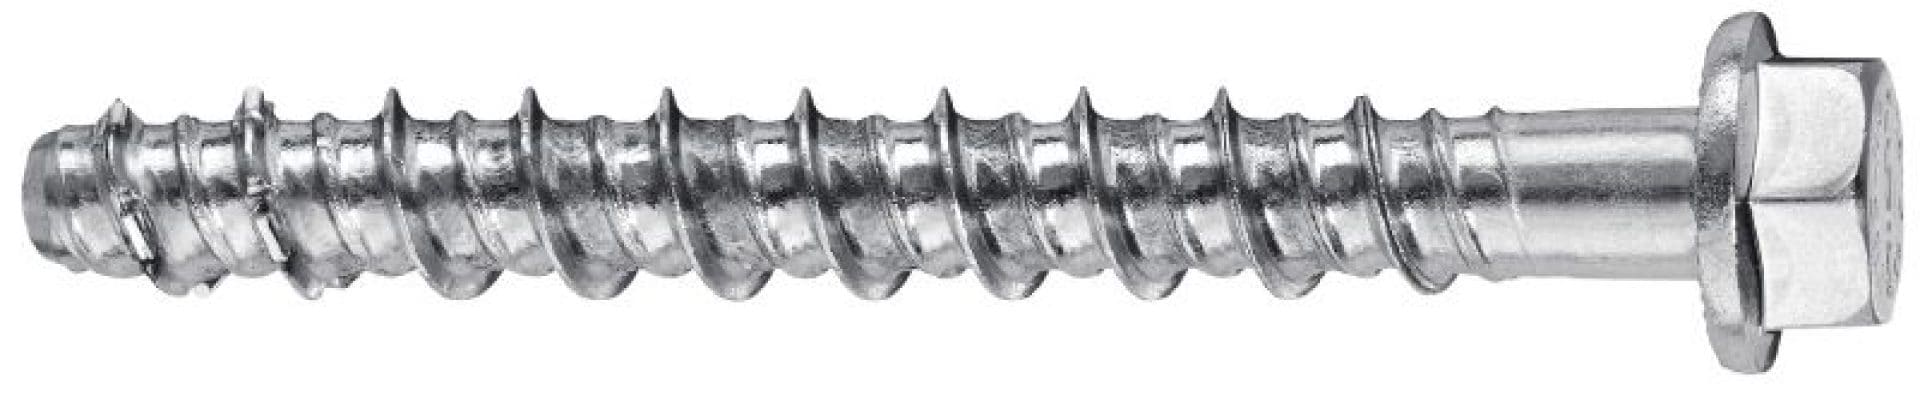 HUS-HR ultimate performance screw anchor (stainless steel)